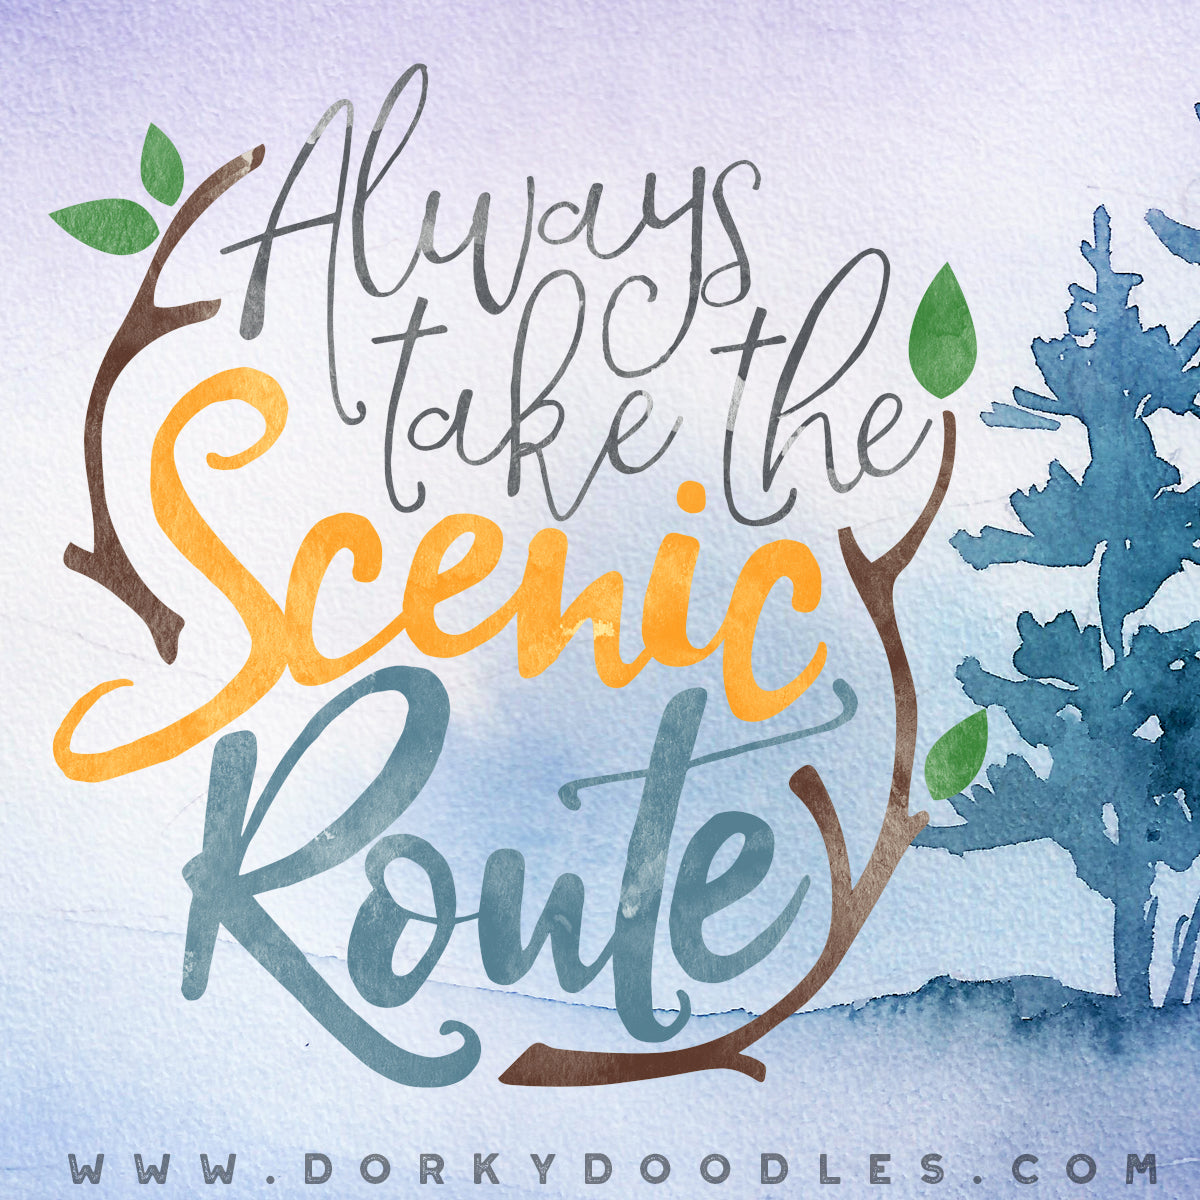 always take the scenic route - motivational monday